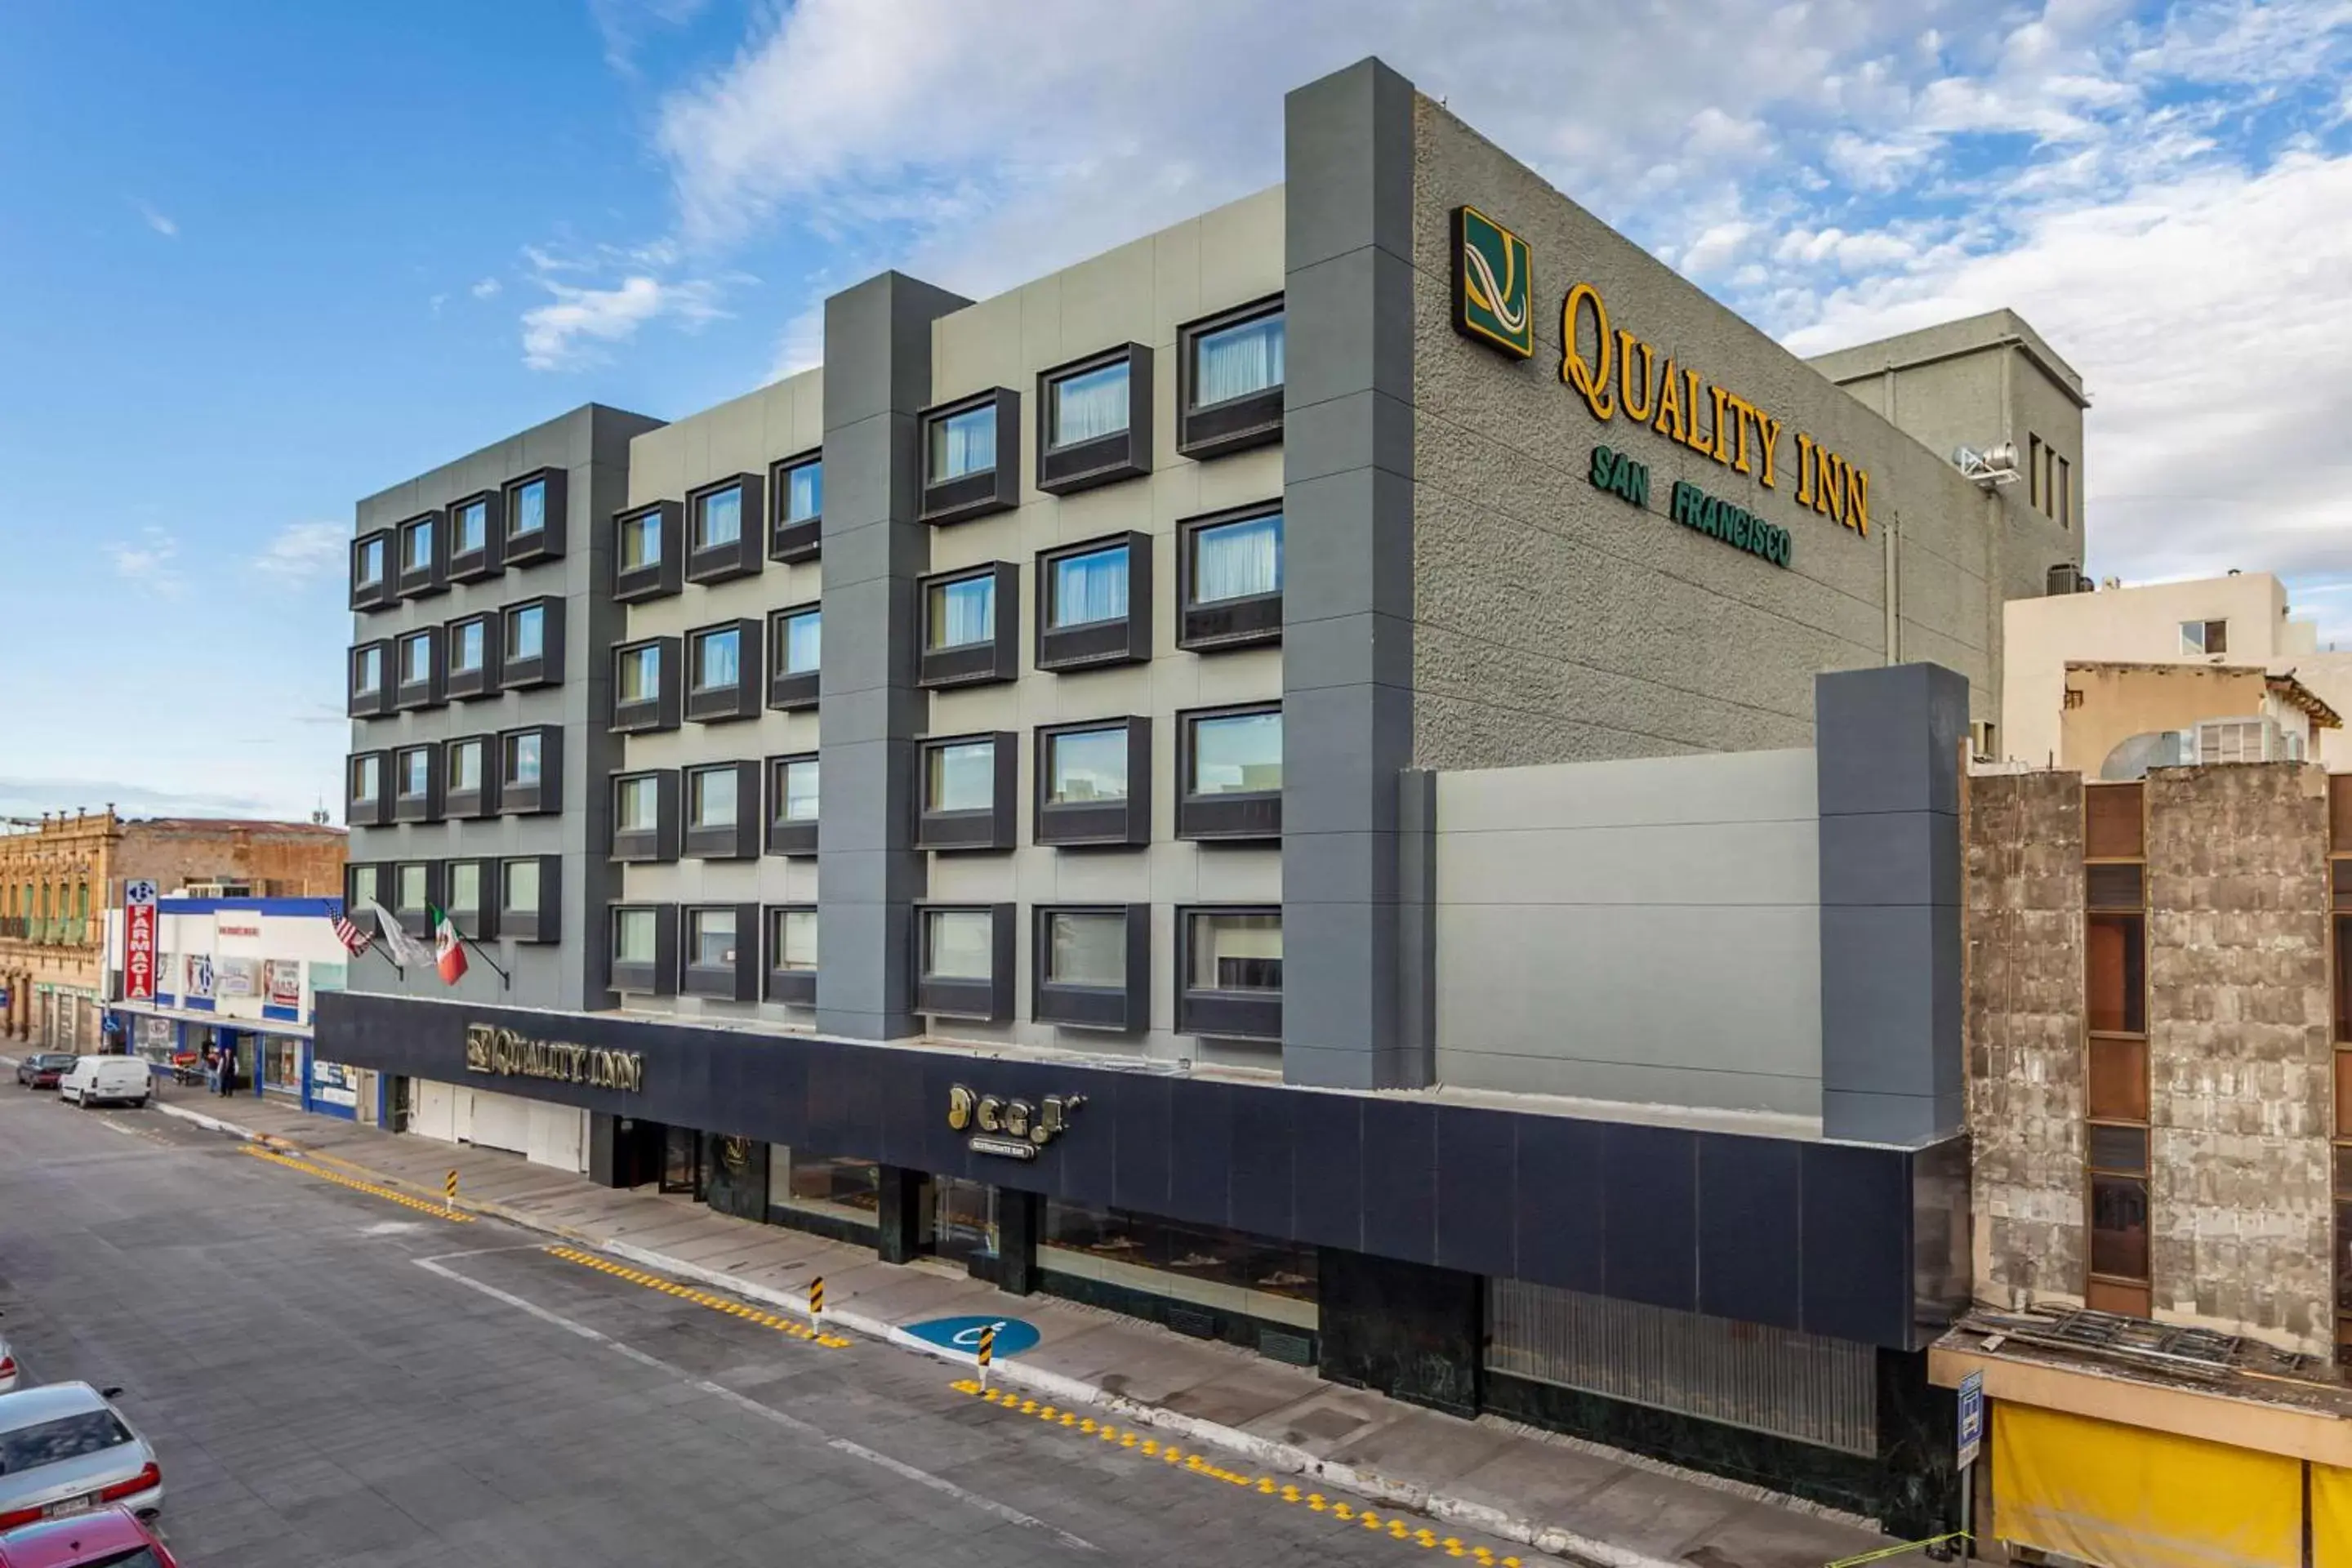 Property Building in Quality Inn Chihuahua San Francisco